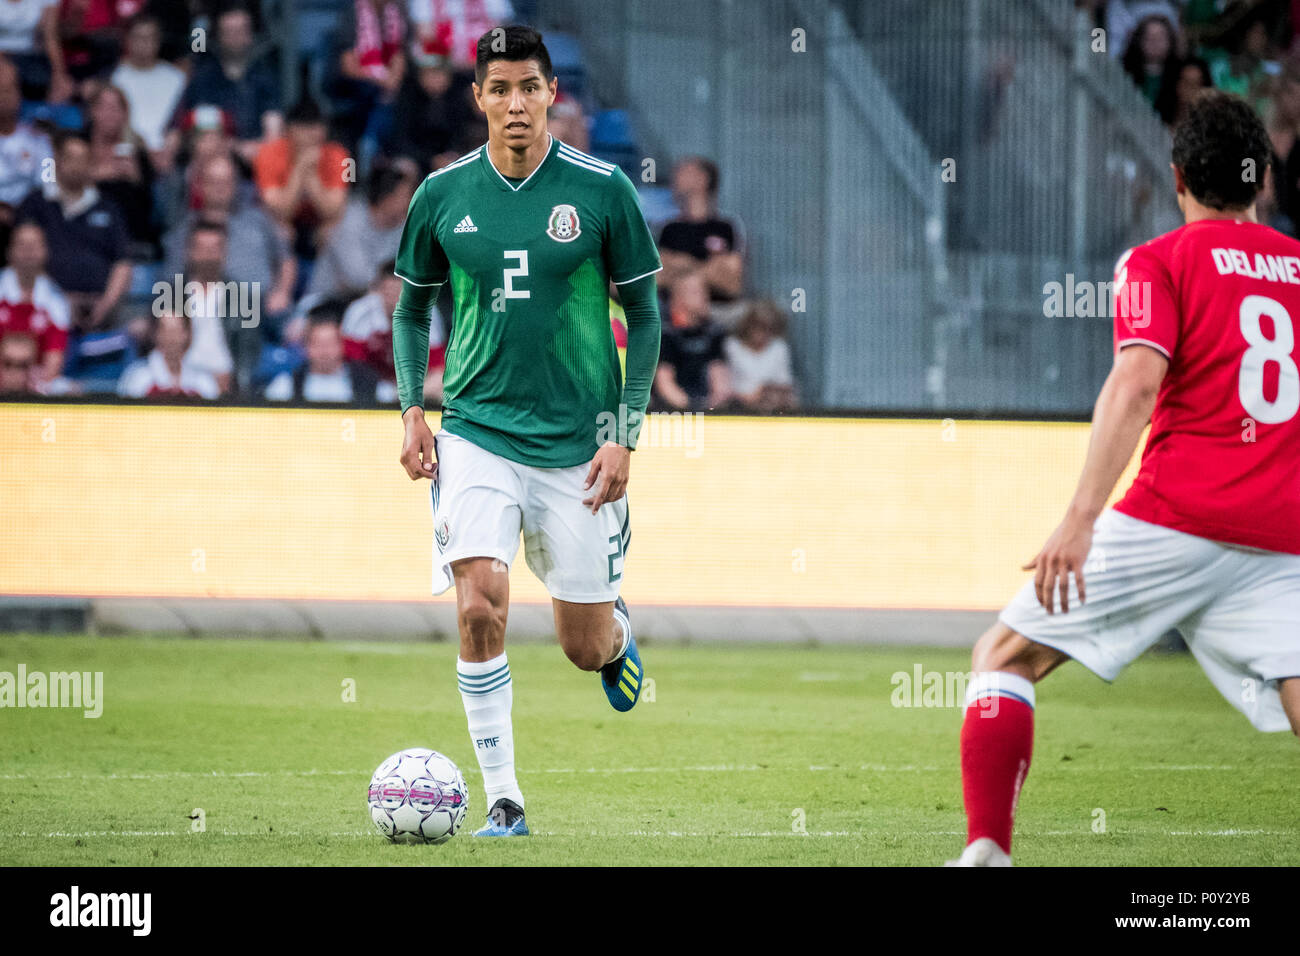 Denmark, Brøndby - June 09, 2018. Hugo Ayala Castro (2) of Mexico seen during the football friendly between Denmark and Mexico at Brøndby Stadion. (Photo credit: Gonzales Photo - Kim M. Leland). Credit: Gonzales Photo/Alamy Live News Stock Photo